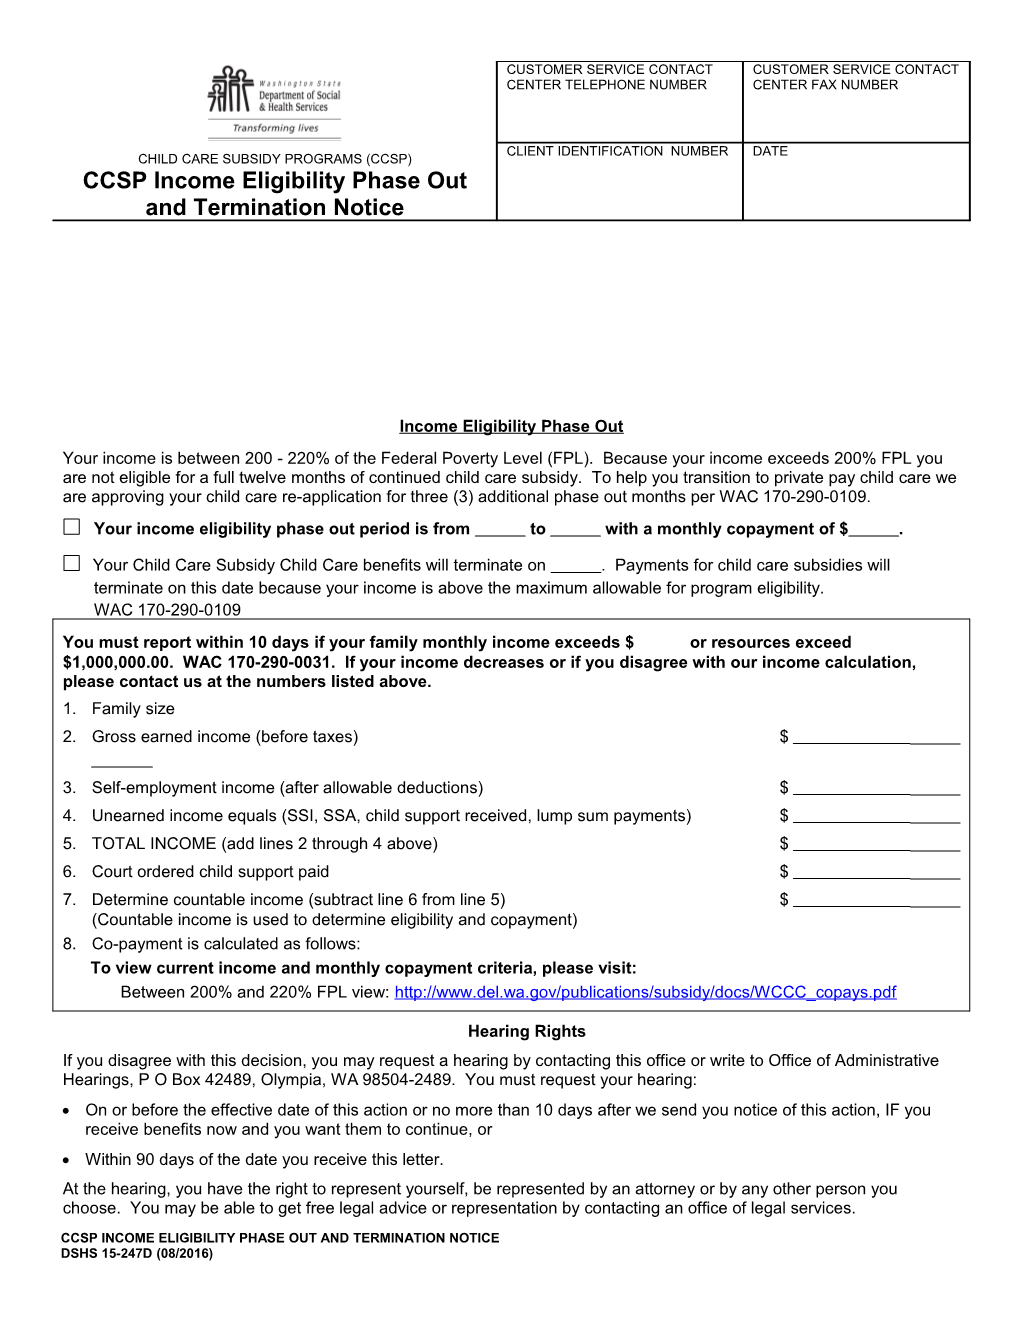 CCSP Income Eligibility Phase out and Termination Notice